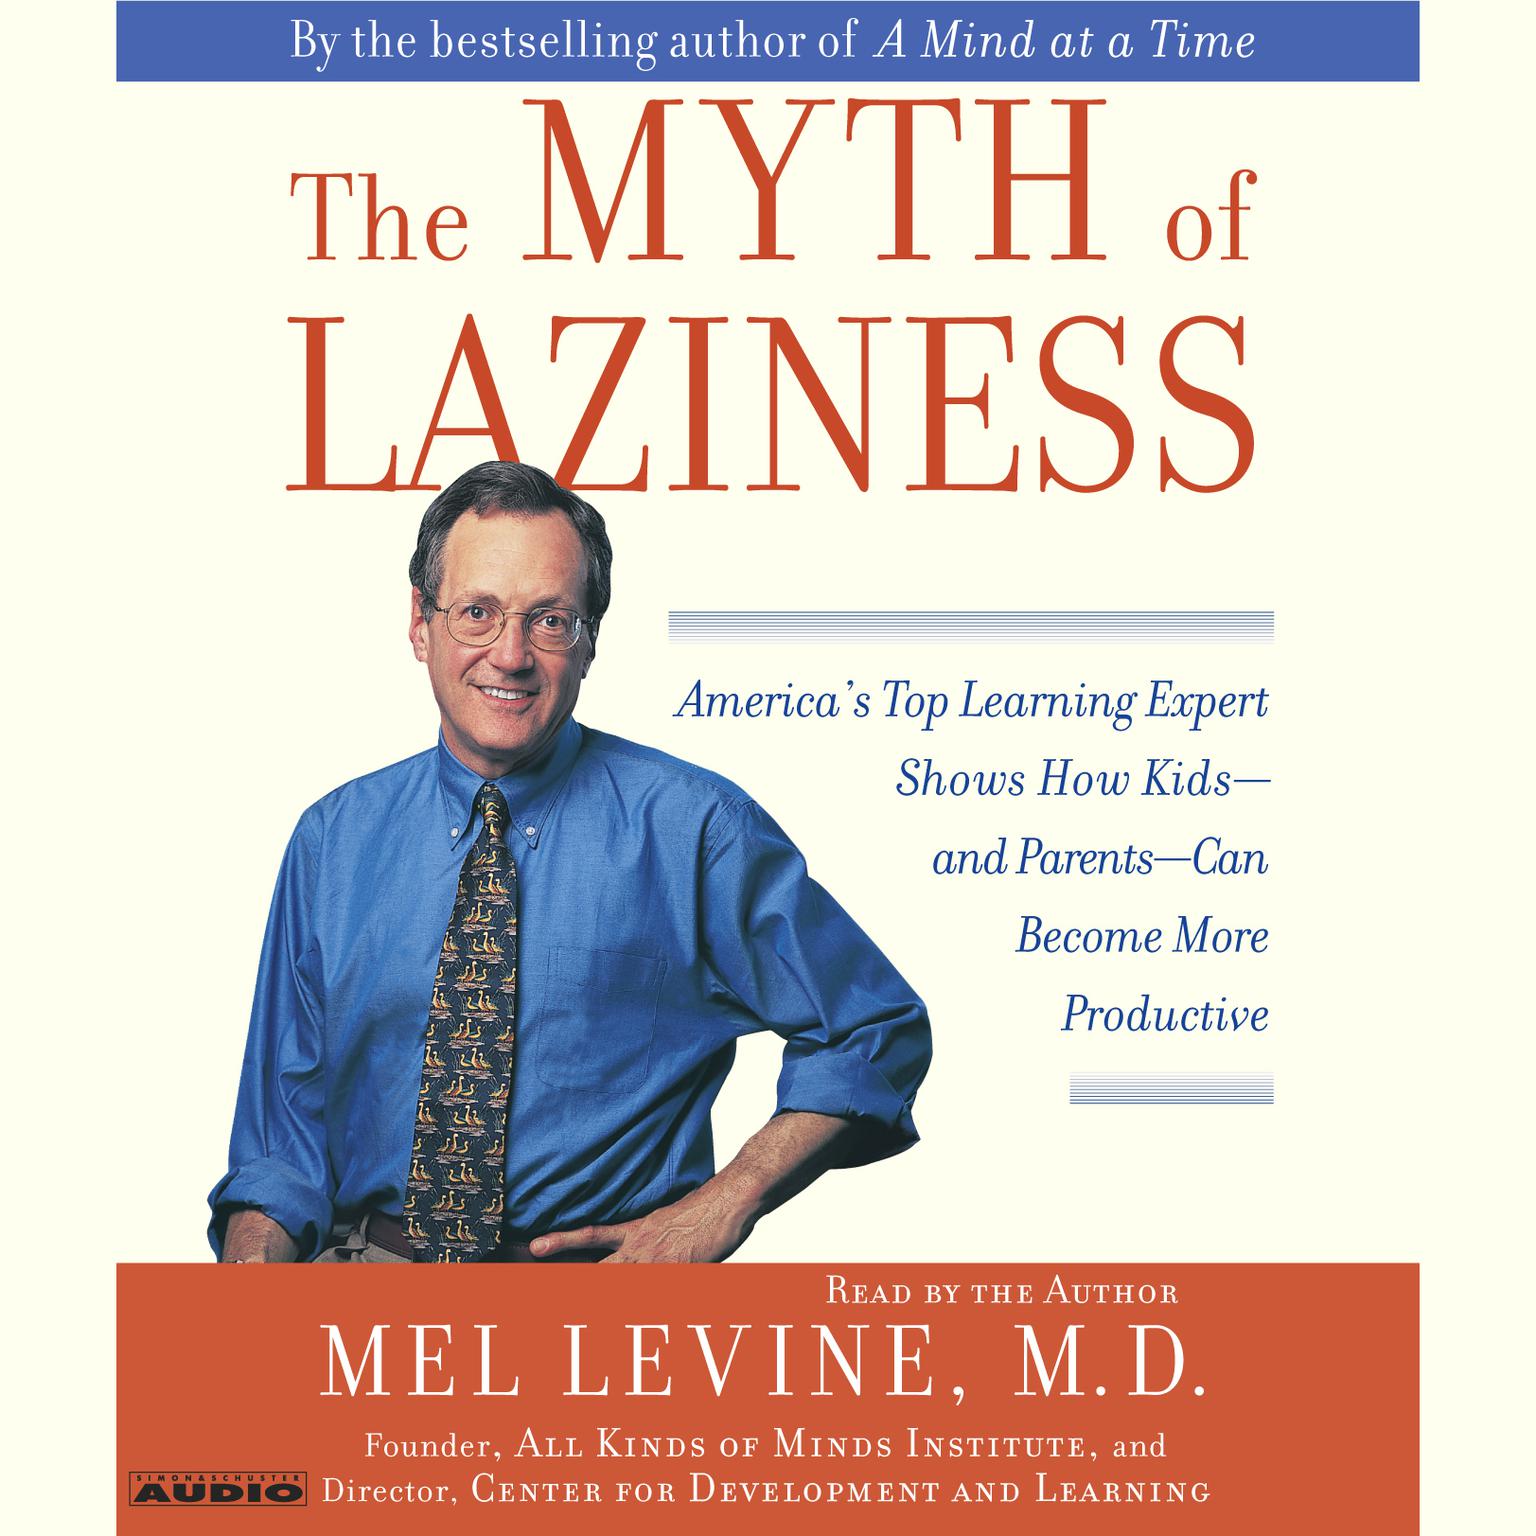 The Myth of Laziness (Abridged): Americas Top Learning Expert Shows How Kids—and Parents—Can Become More Productive Audiobook, by Mel Levine